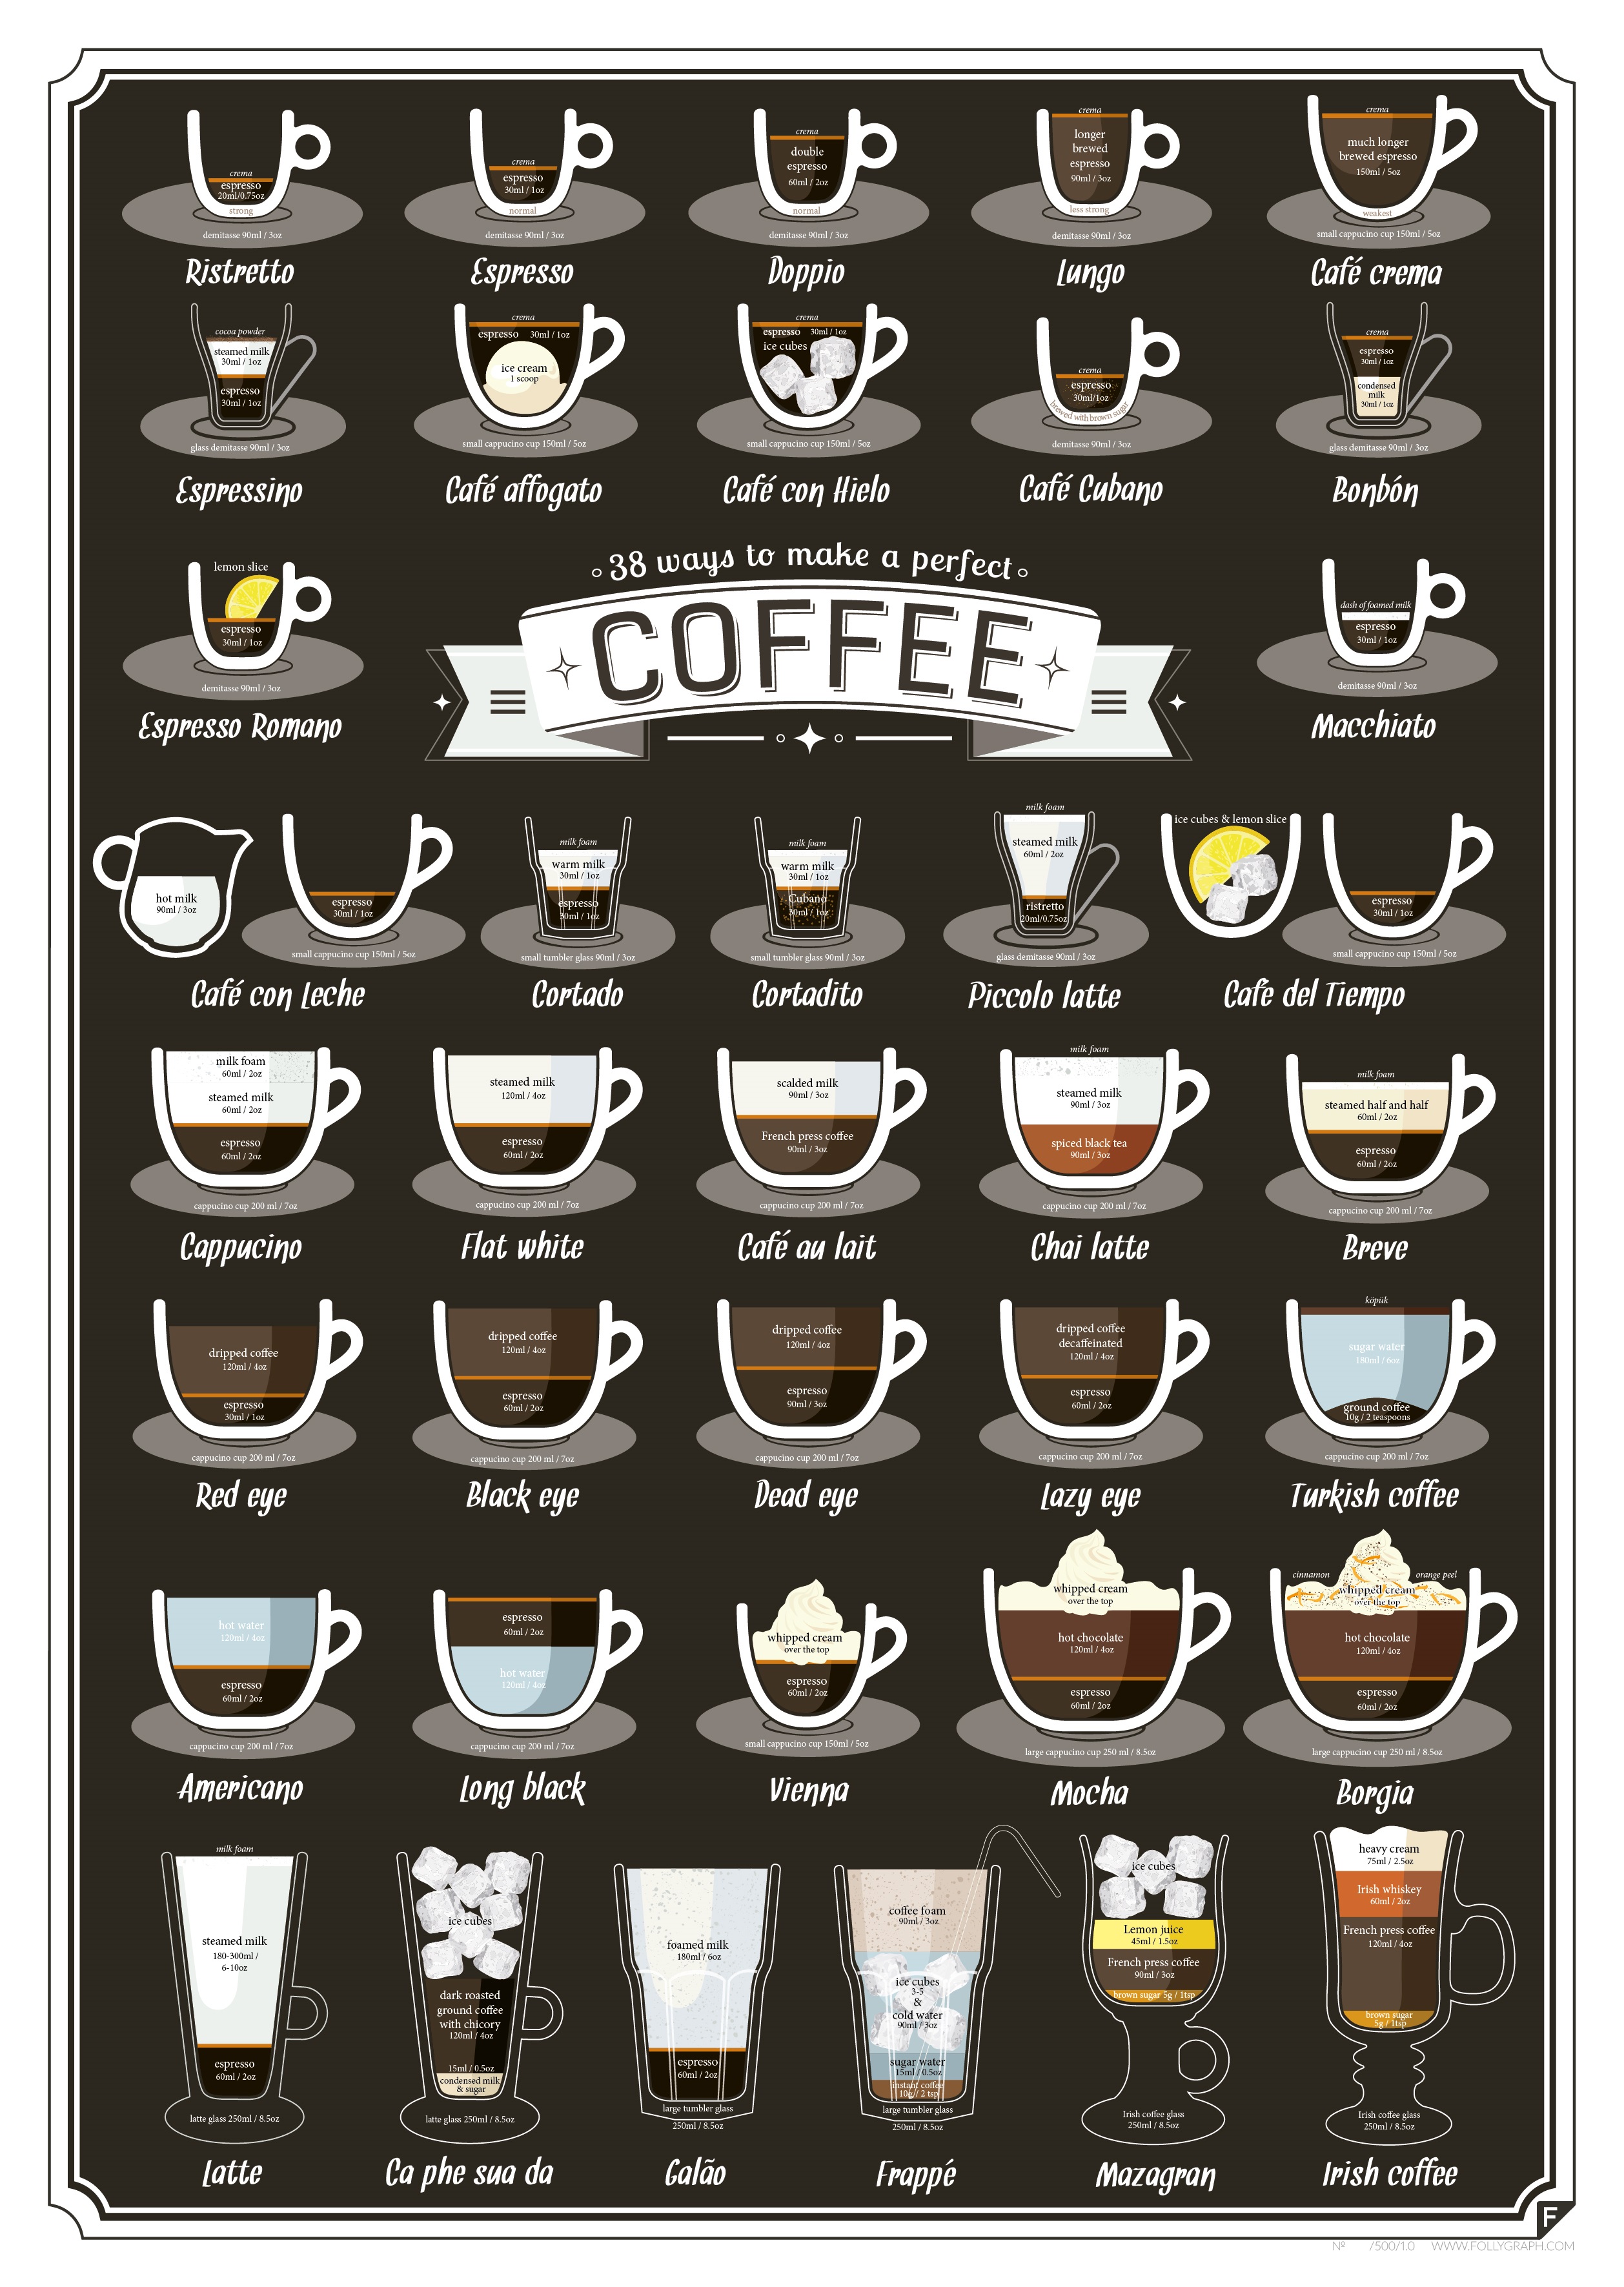 Ratio of Different Coffee Drinks